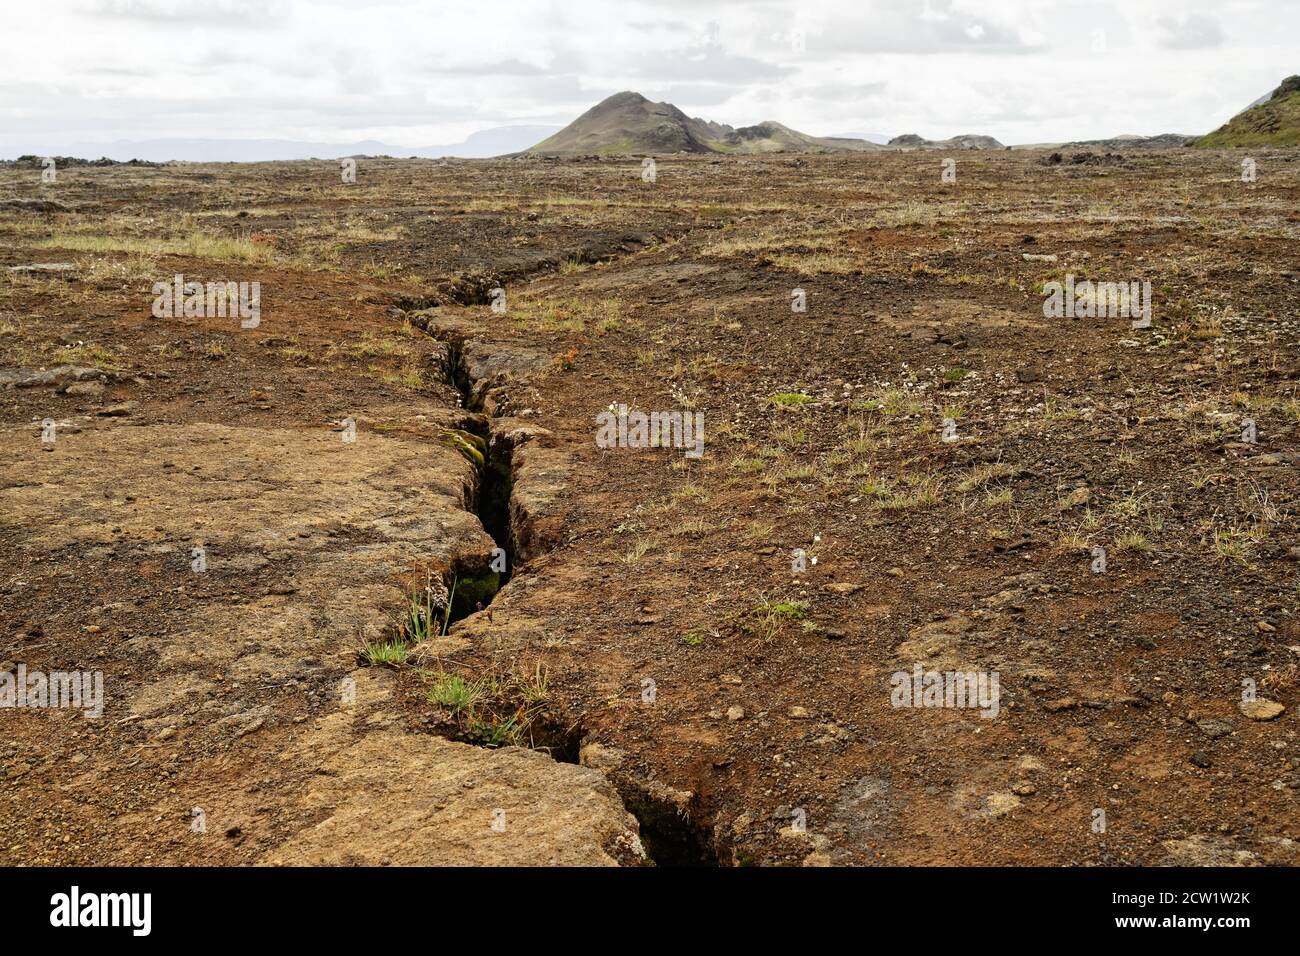 Barren steppe-like landscape in shades of brown and ocher, through the surface runs a dark rift, mountains in the background - Location: Iceland Stock Photo